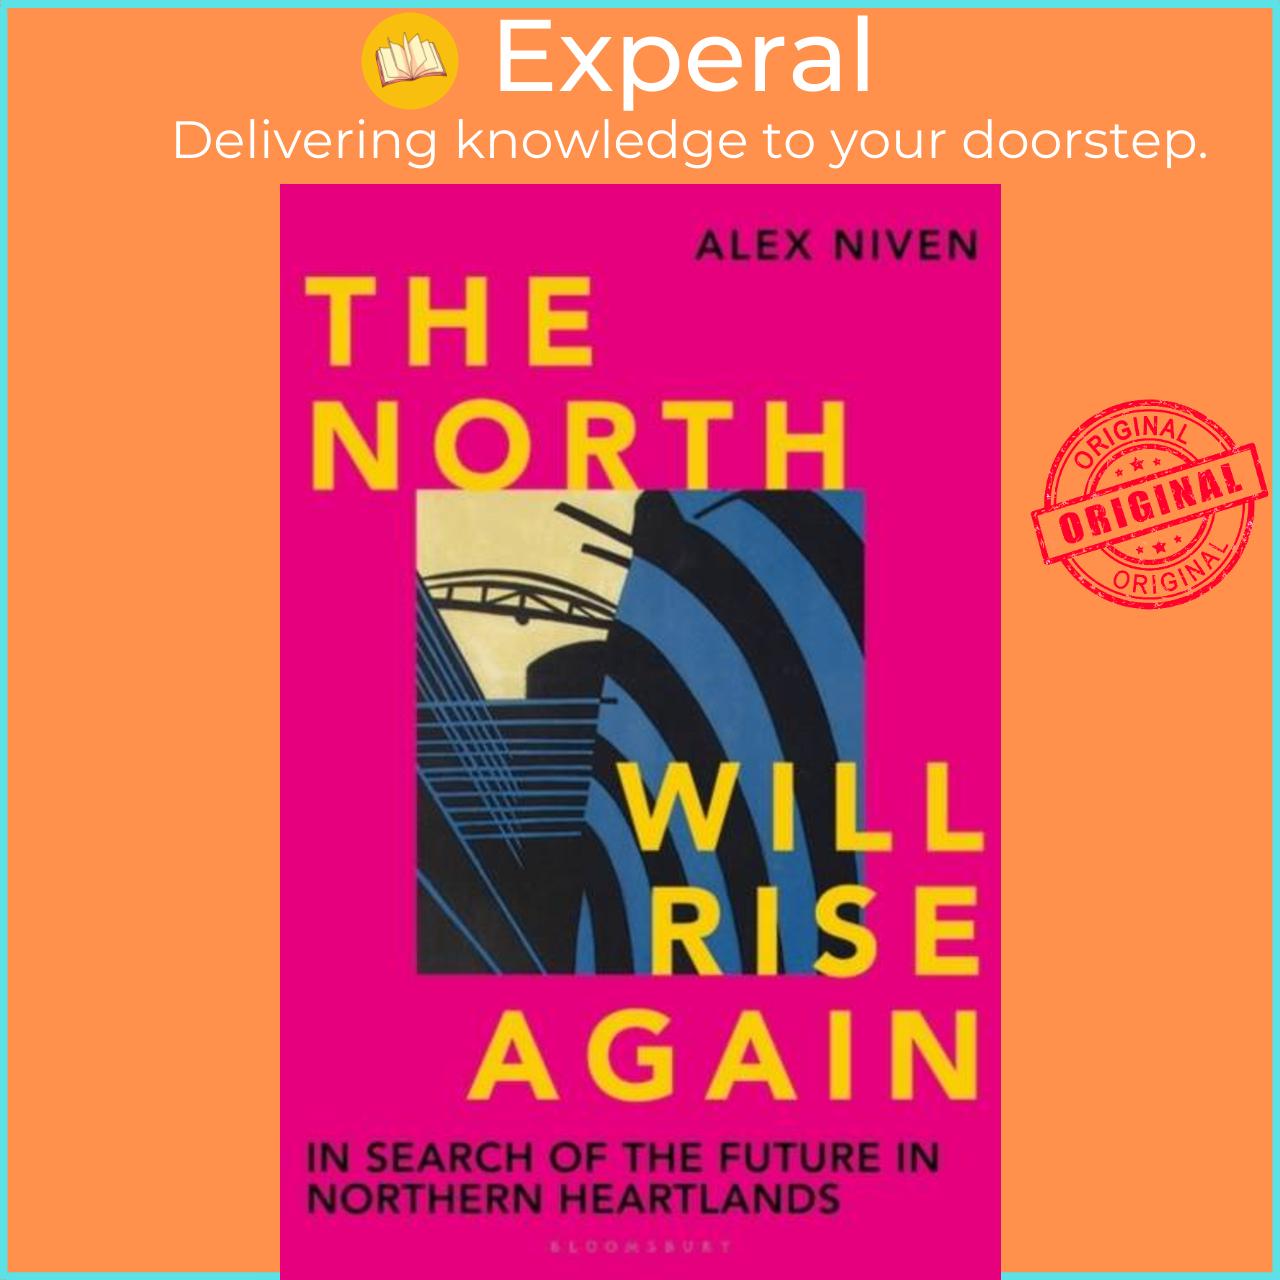 Sách - The North Will Rise Again - In Search of the Future in Northern Heartlands by Alex Niven (UK edition, hardcover)